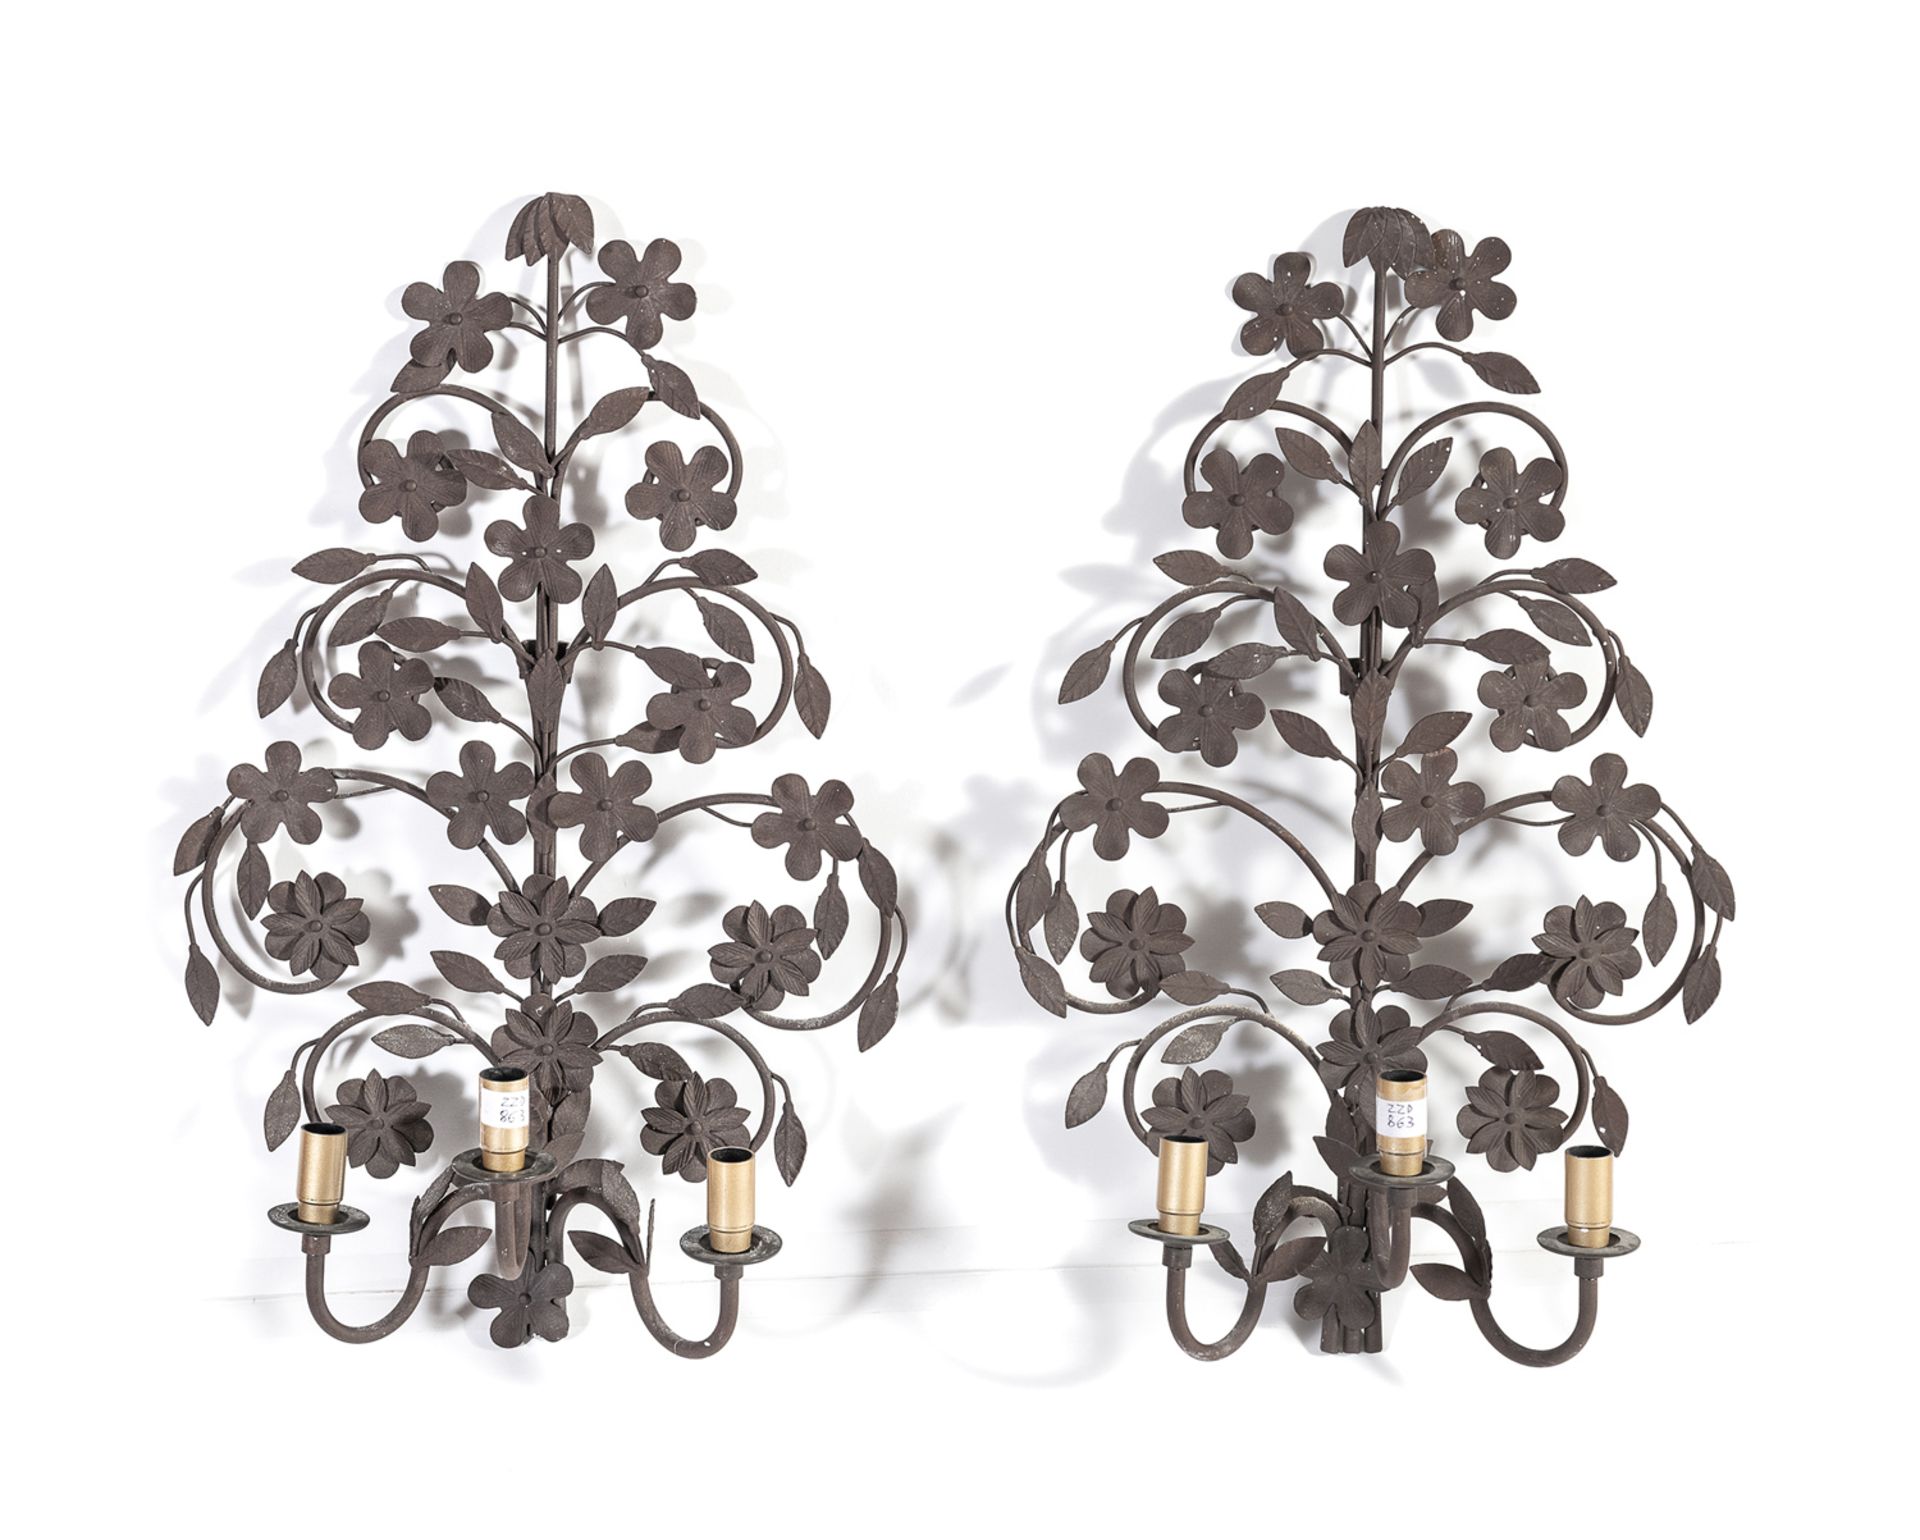 PAIR OF WROUGHT IRON APPLIQUES LATE 19th CENTURY